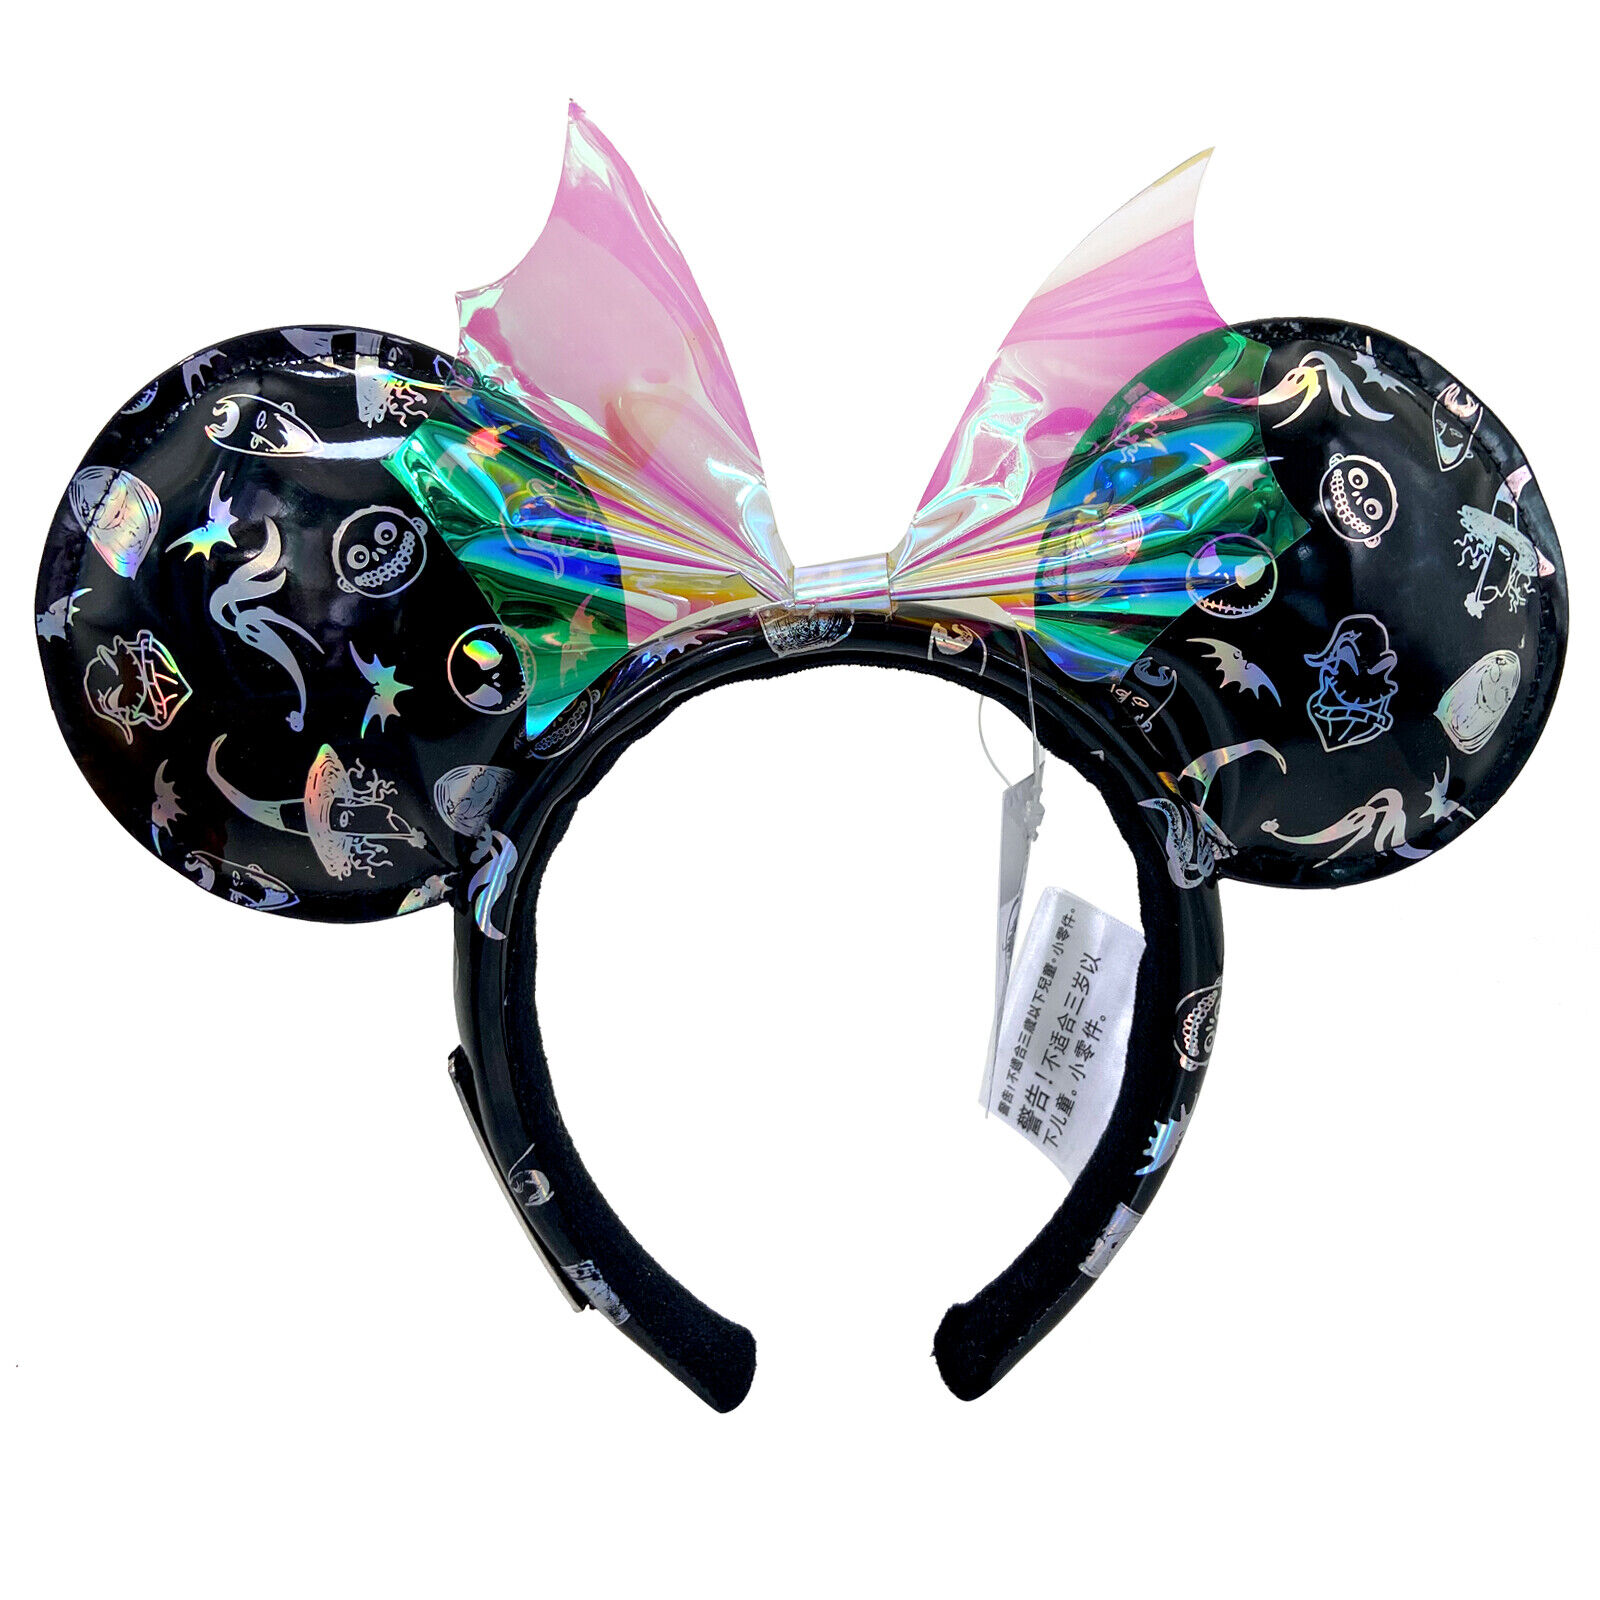 DisneyParks The Nightmare Before Christmas Minnie Mouse Clear Bow Headband Ears